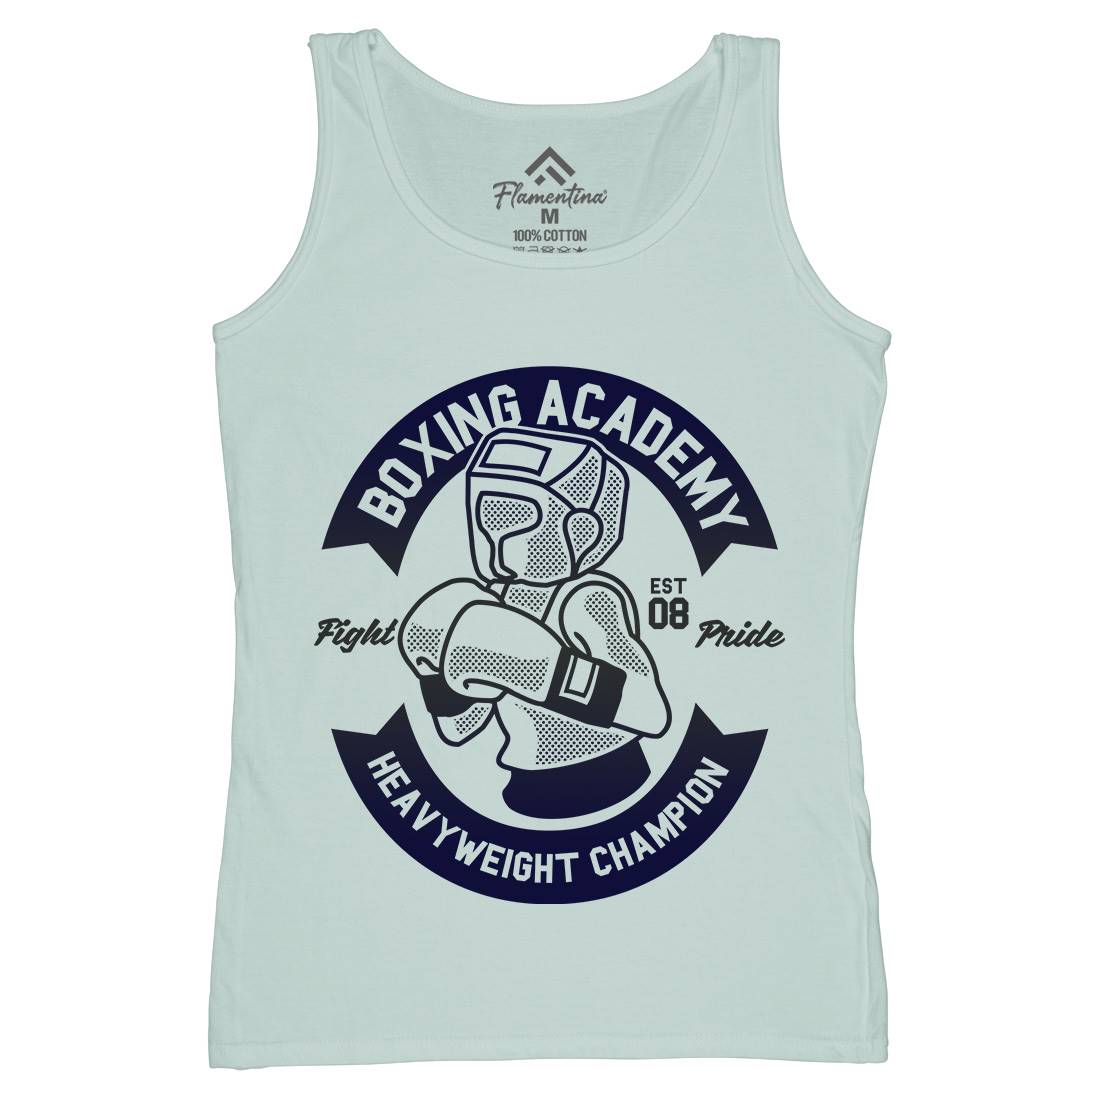 Boxing Academy Womens Organic Tank Top Vest Gym A213